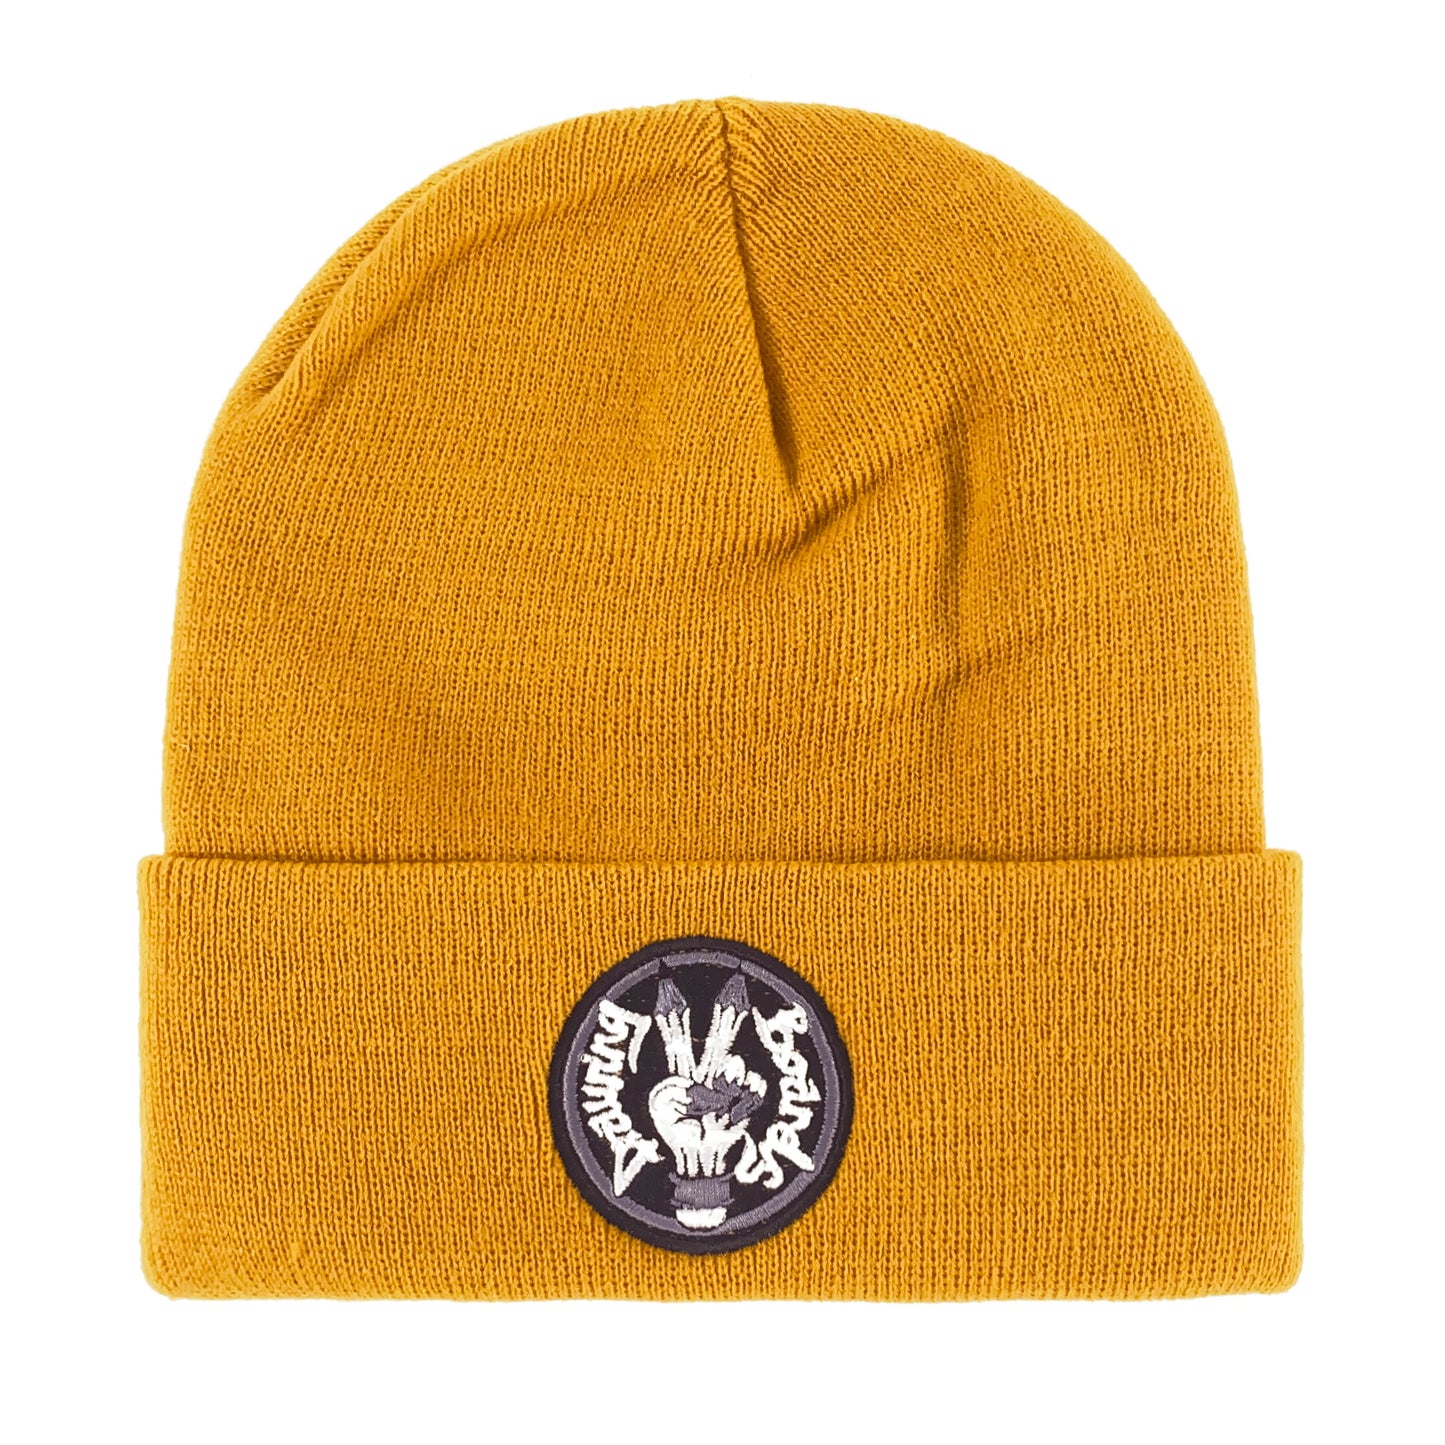 The Drawing Boards Fold Up Beanie - Mustard - Prime Delux Store